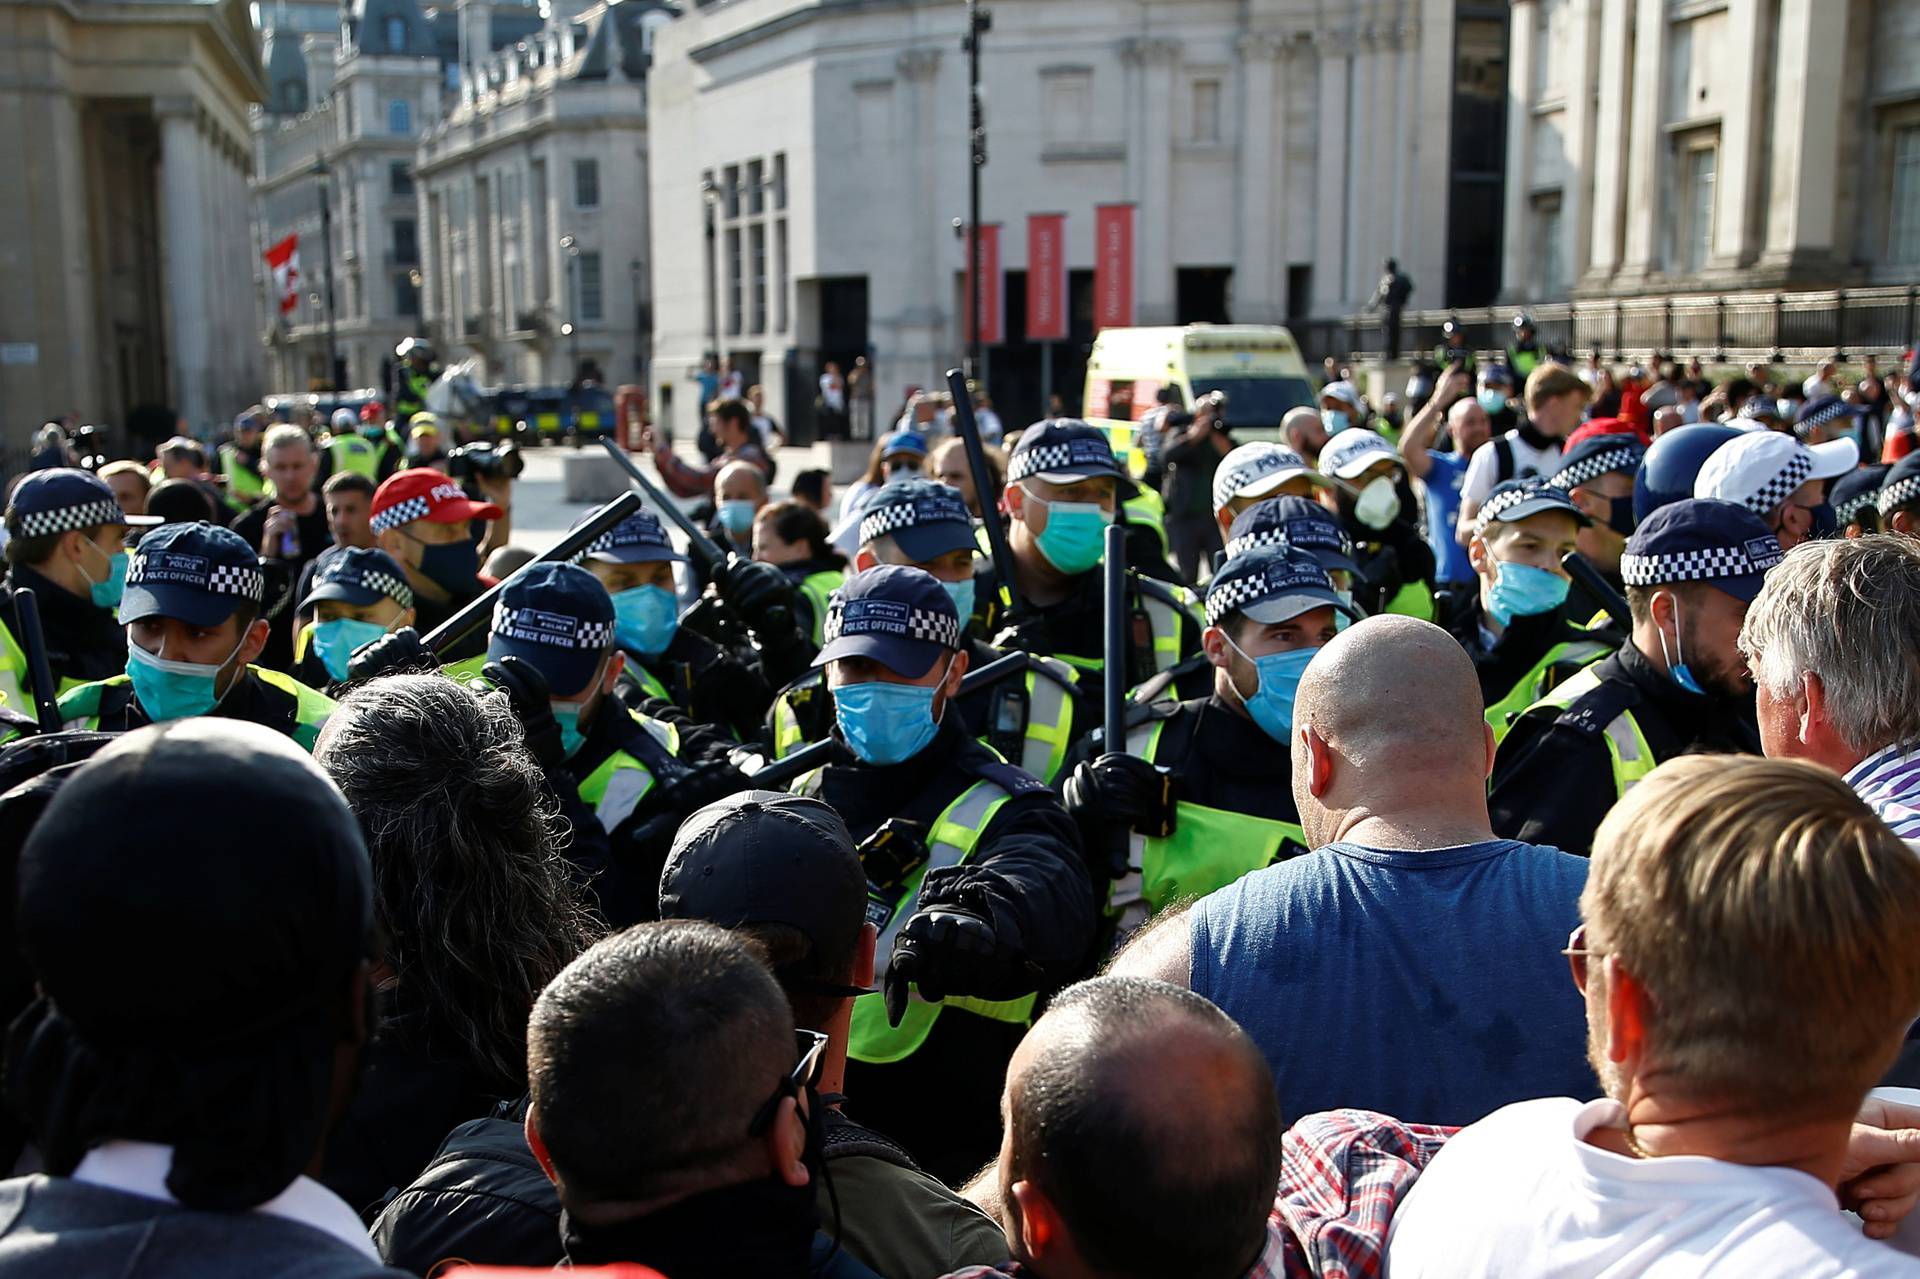 People gather in Trafalgar Square to protest against the lockdown imposed by the government, in London